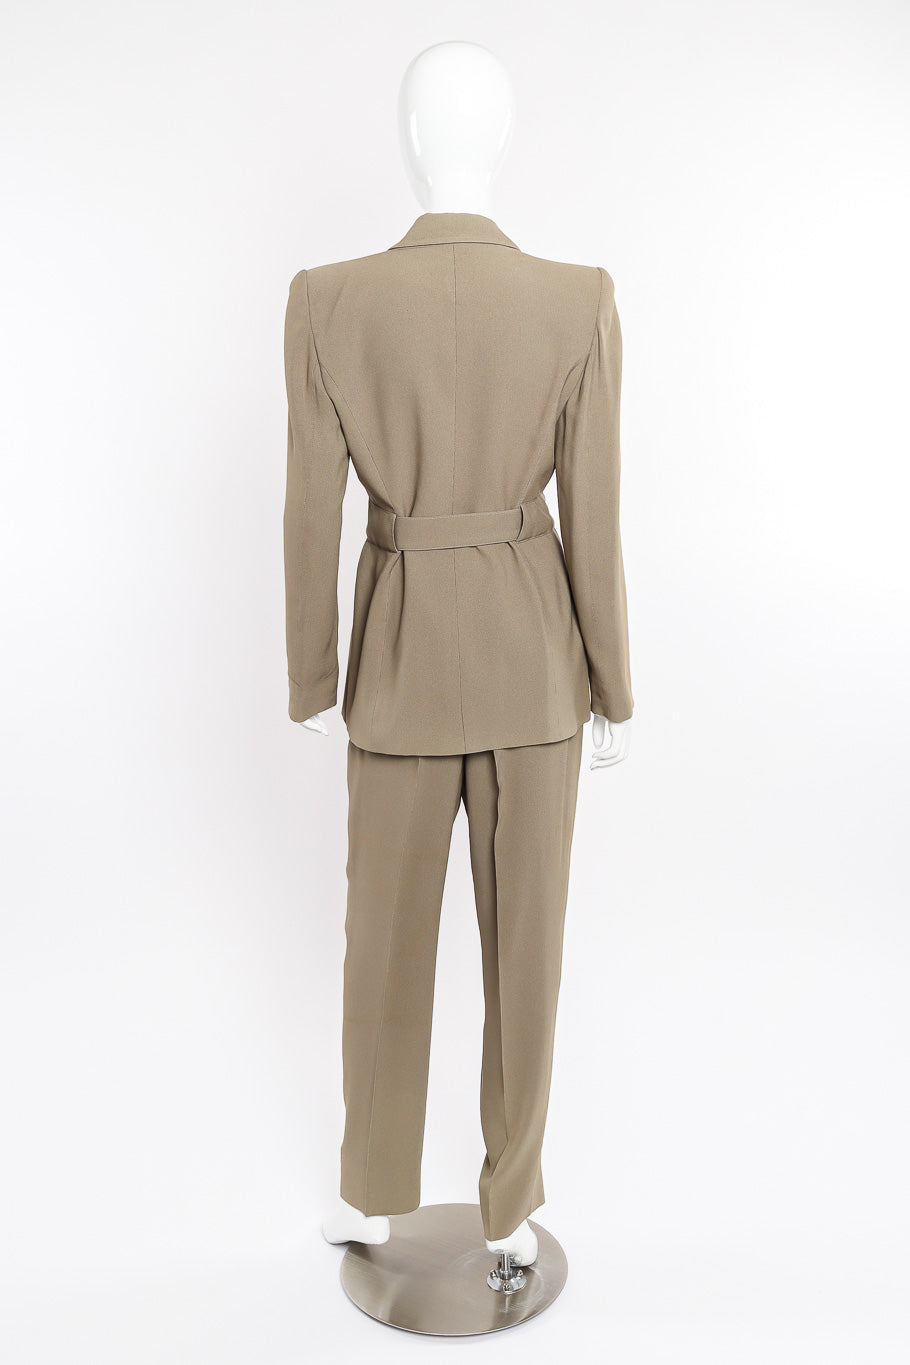  Jacket and pant suit set by State of Claude Montana on mannequin back @recessla